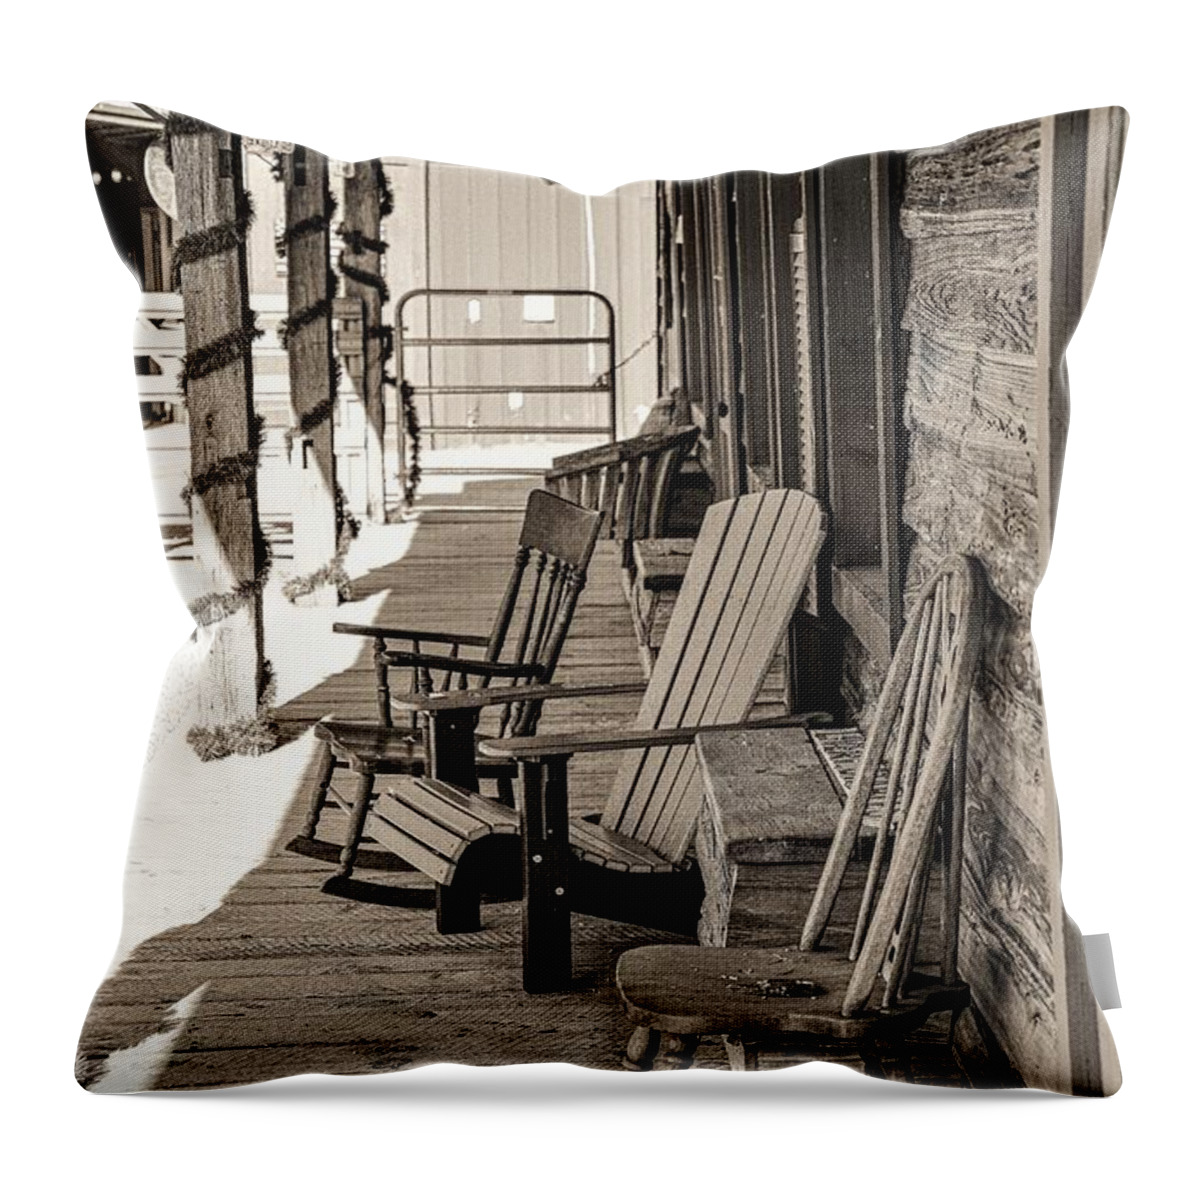 Porch Chair Old B&w Barn Throw Pillow featuring the photograph Porch by John Linnemeyer